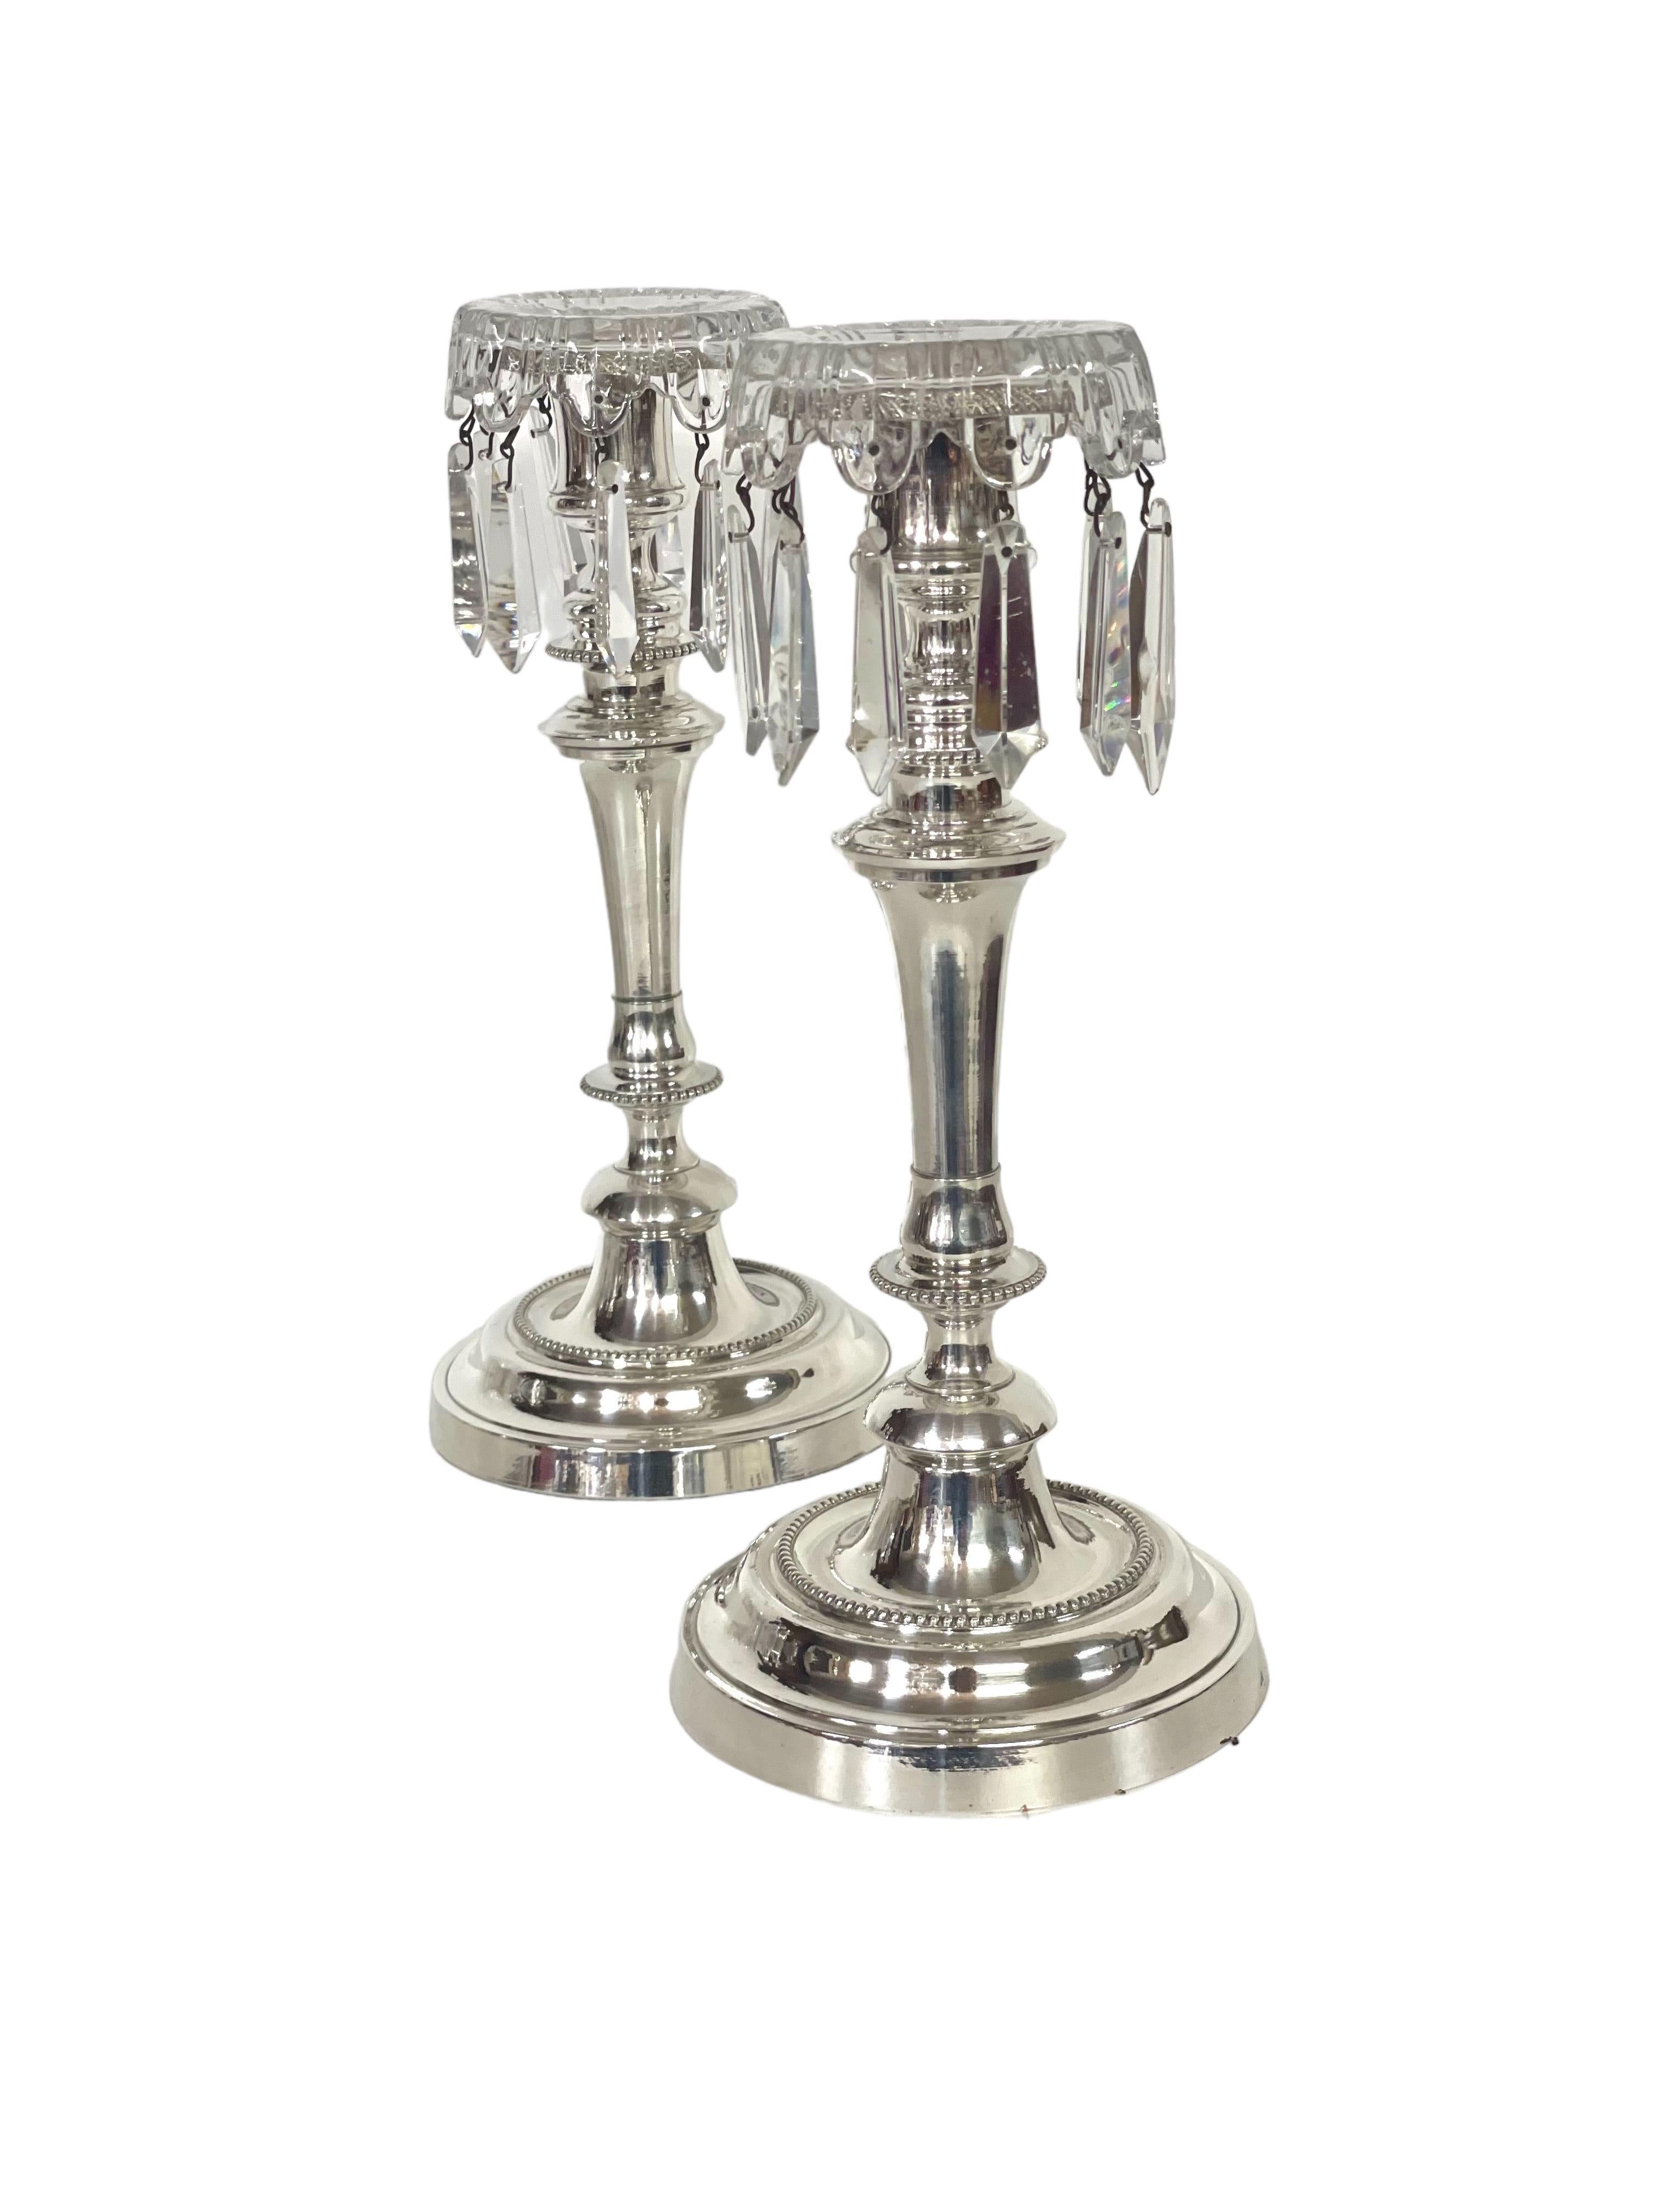 Louis XVI Style Pair of Silver Plated and Crystal Candle Holders by Morlot For Sale 2